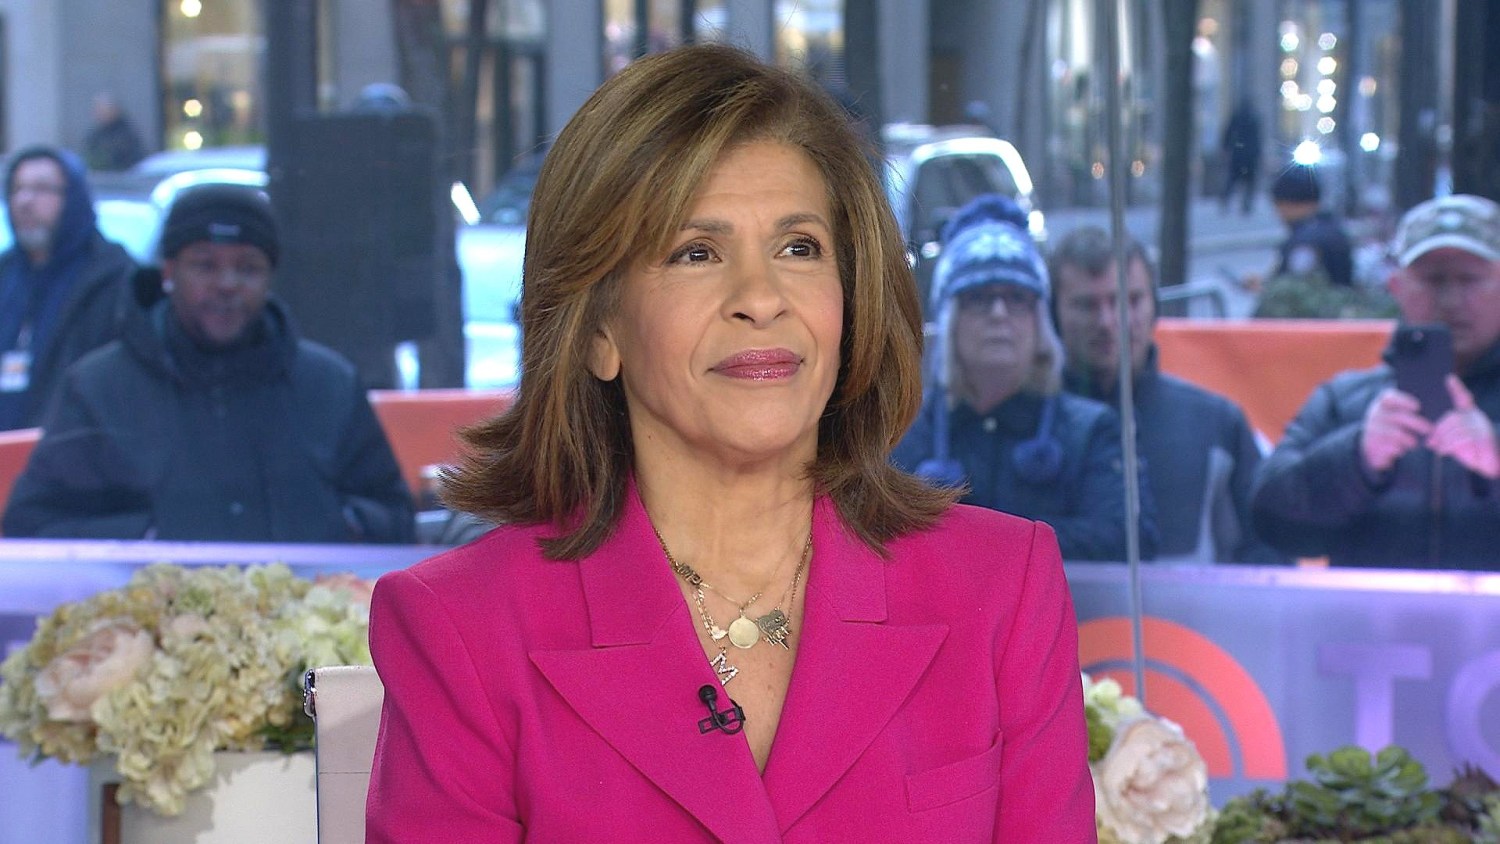 Hoda Kotb Reveals New Hair Color After 'Happy Accident': 'It Was  Fire-Engine Orange'